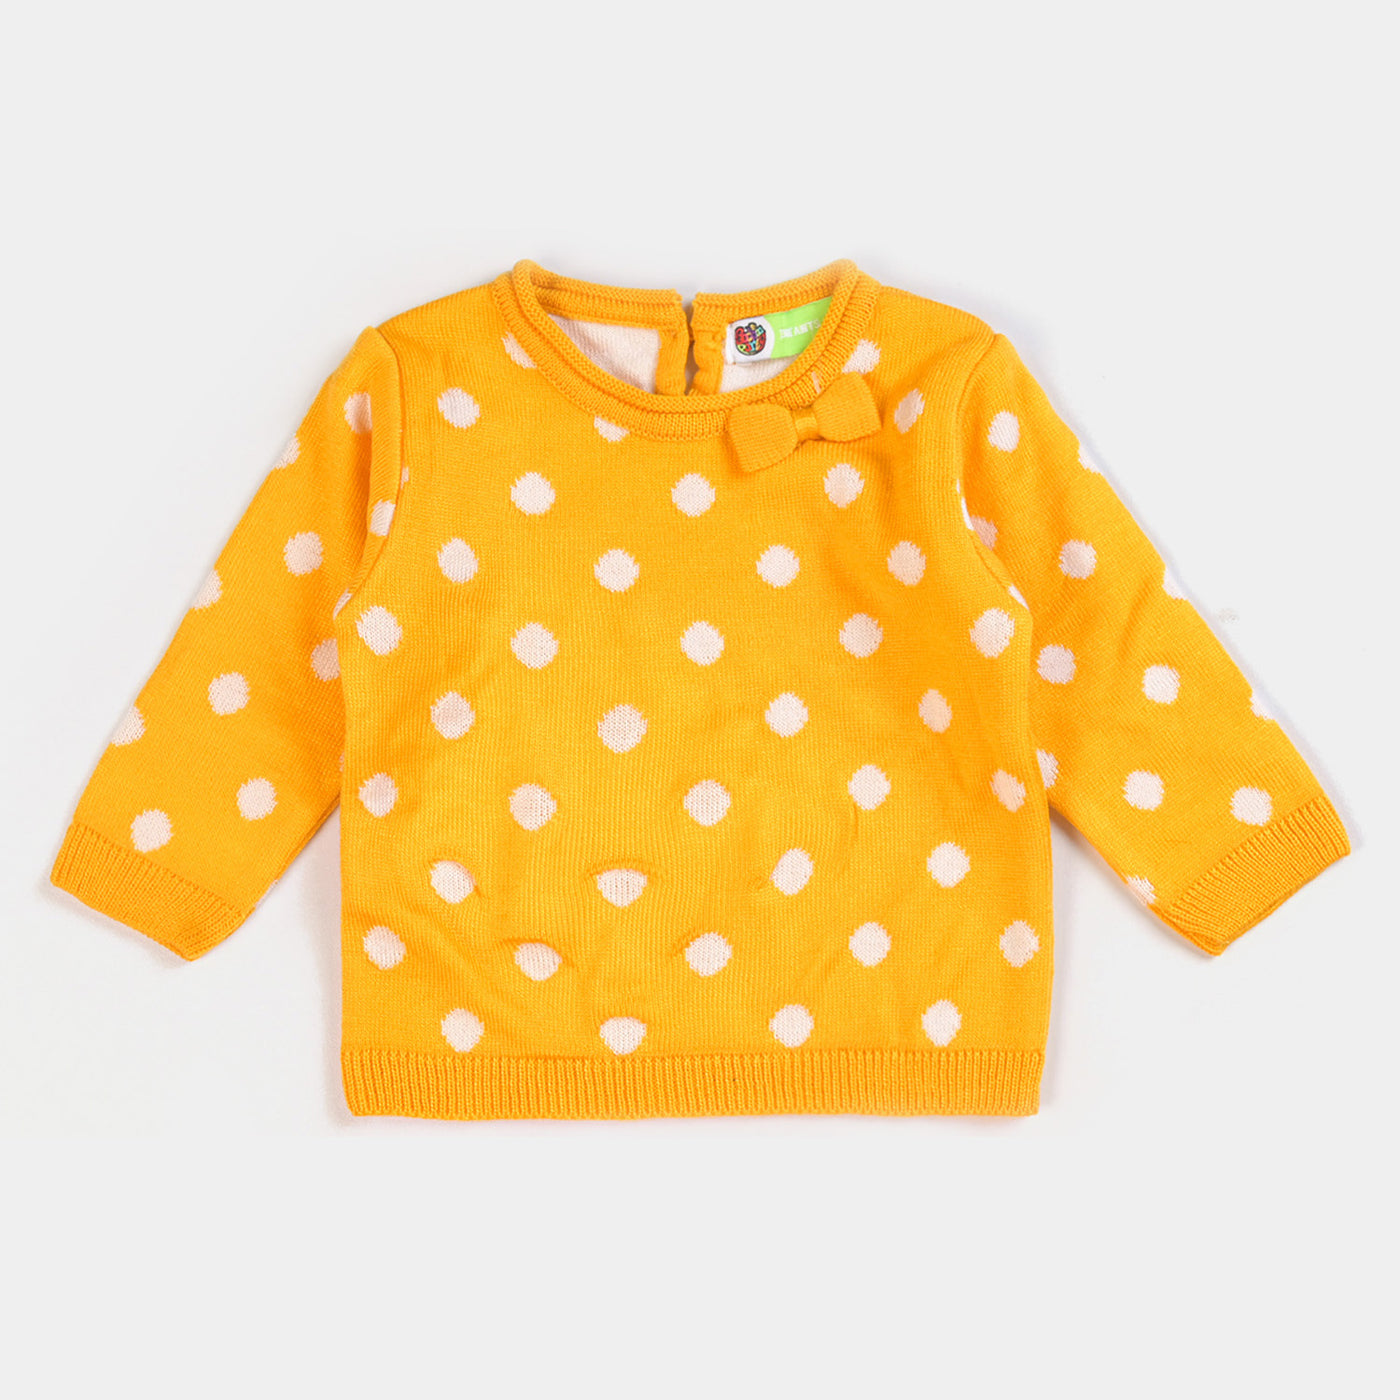 Infant Girls 2PC Knitted Suit -Yellow